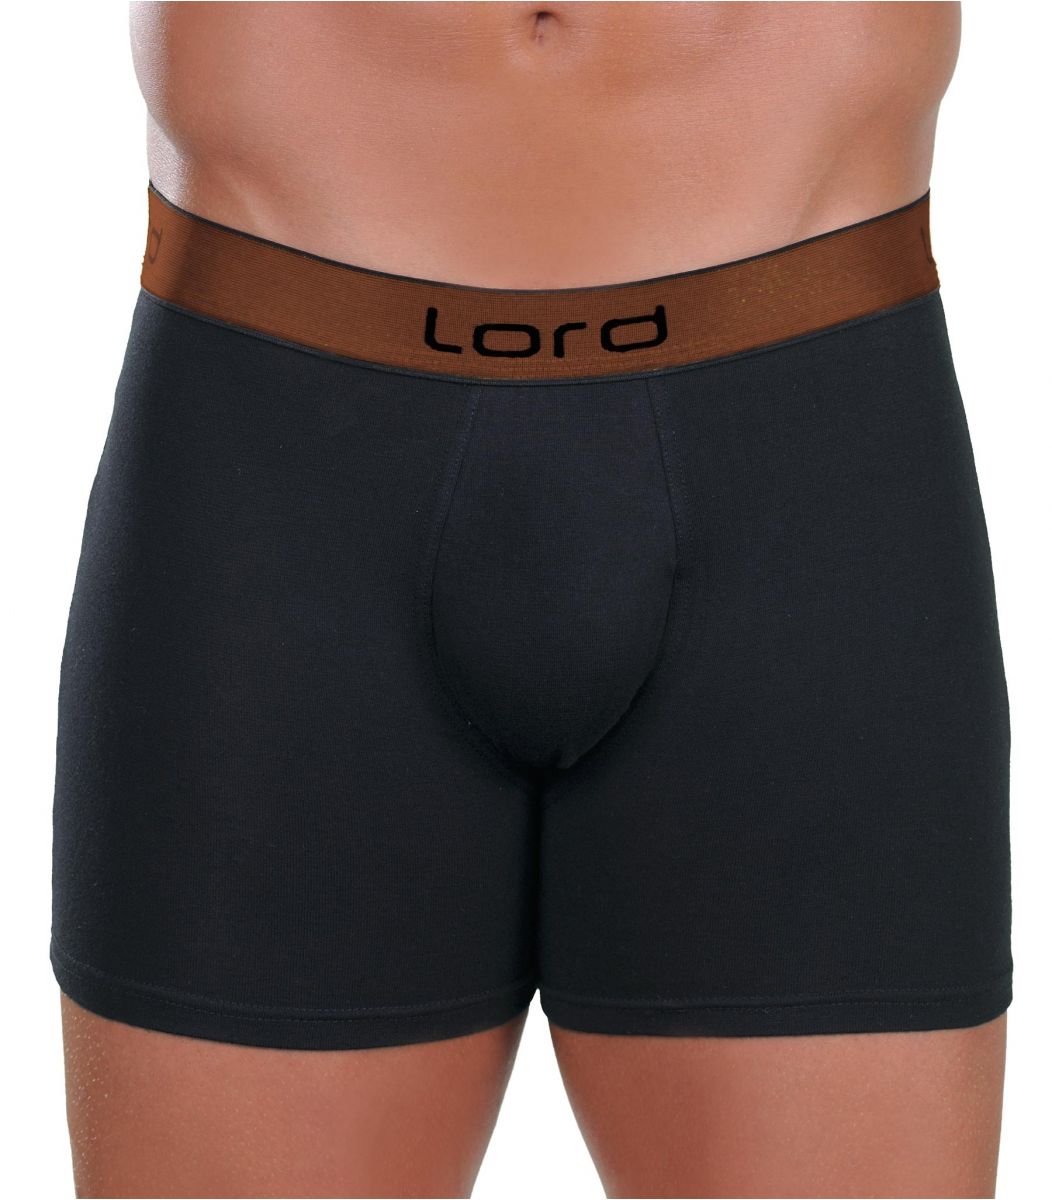  Boxers Lord Lord Boxer Athletic 8192-9